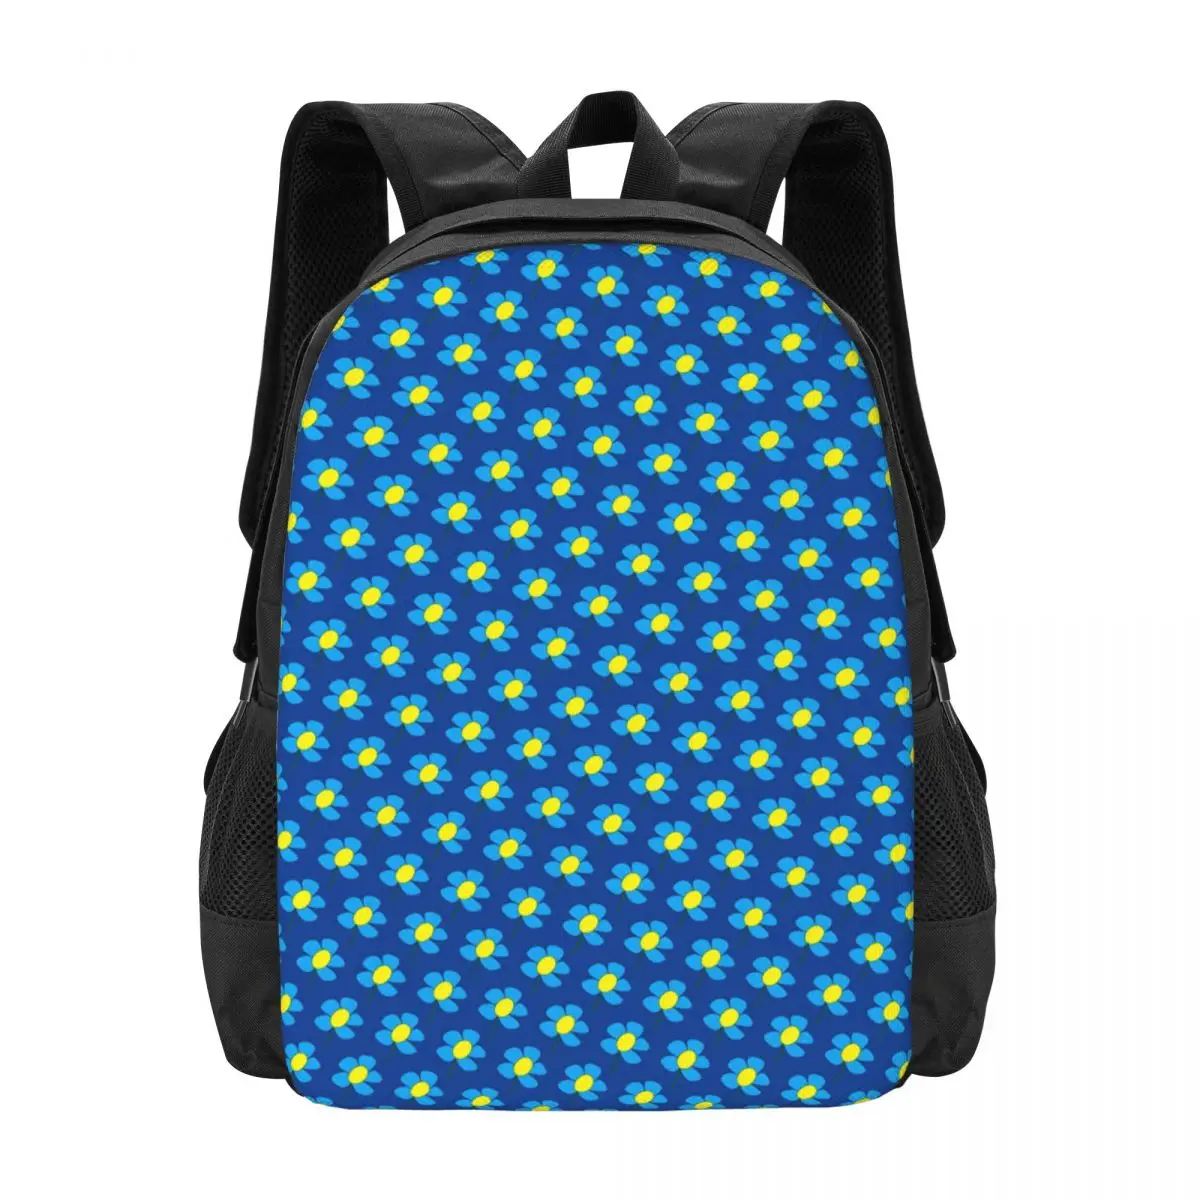 

Blue And Yellow Daisy Backpack Vintage Floral College Backpacks Student Pretty School Bags High Quality Print Rucksack